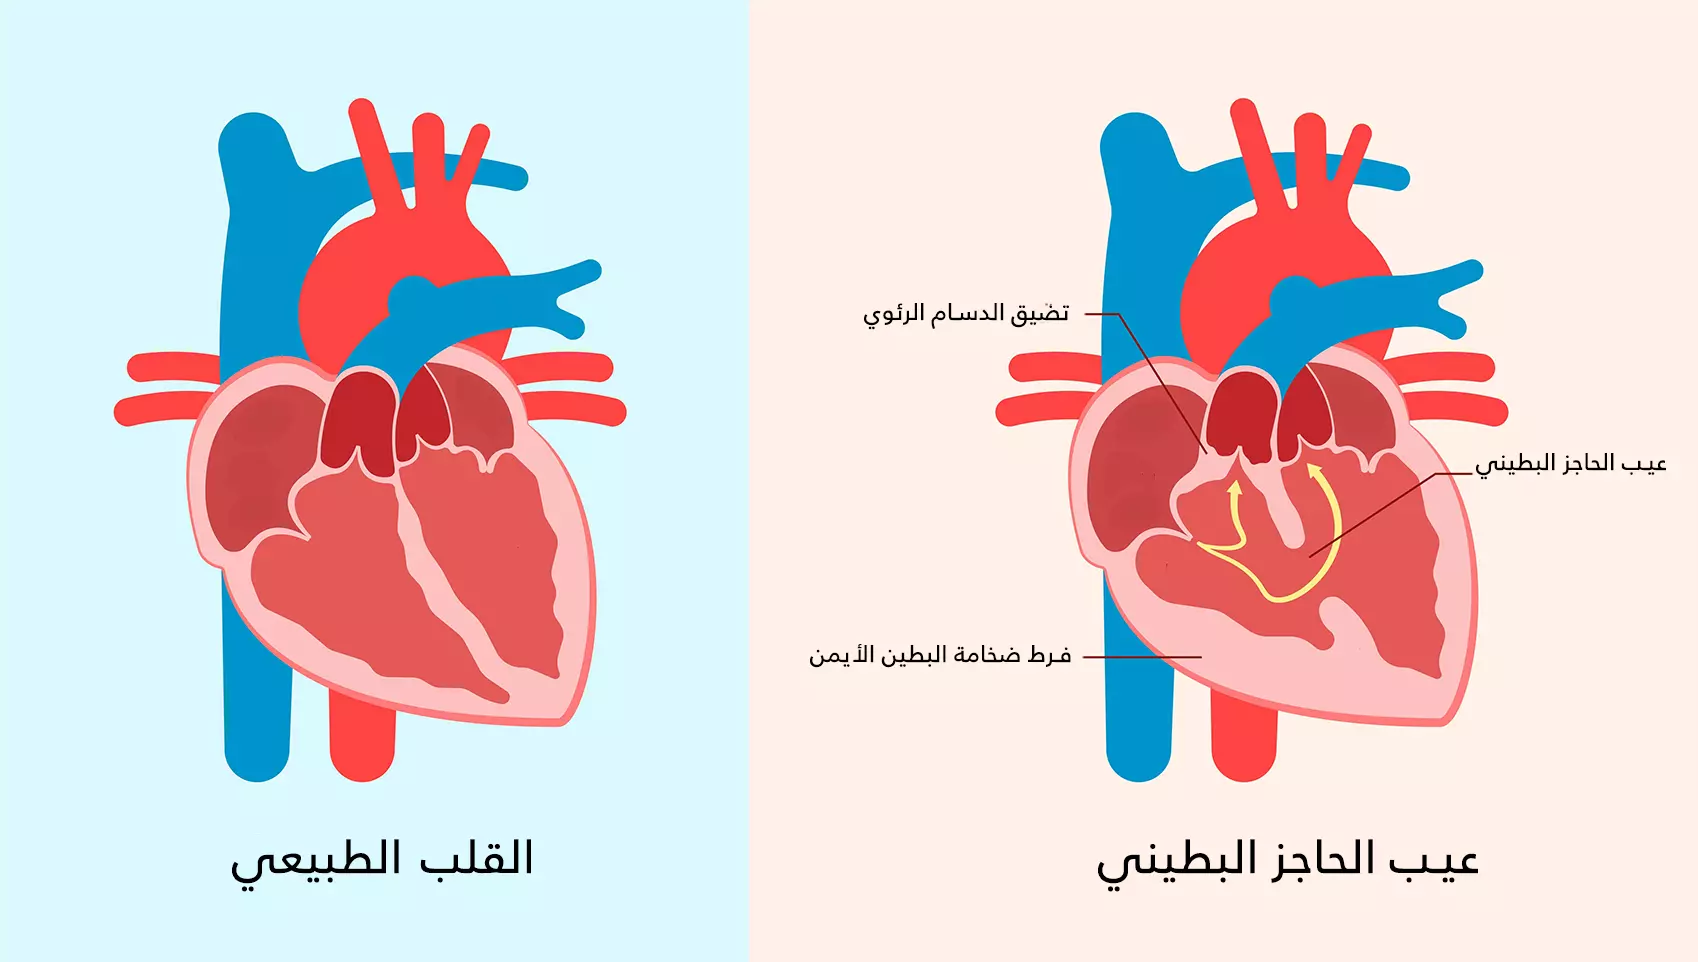 Ventricular septal defect is distinguished from the normal heart by the presence of a hole through which blood passes, which may be associated with pulmonary stenosis and right ventricular hypertrophy.